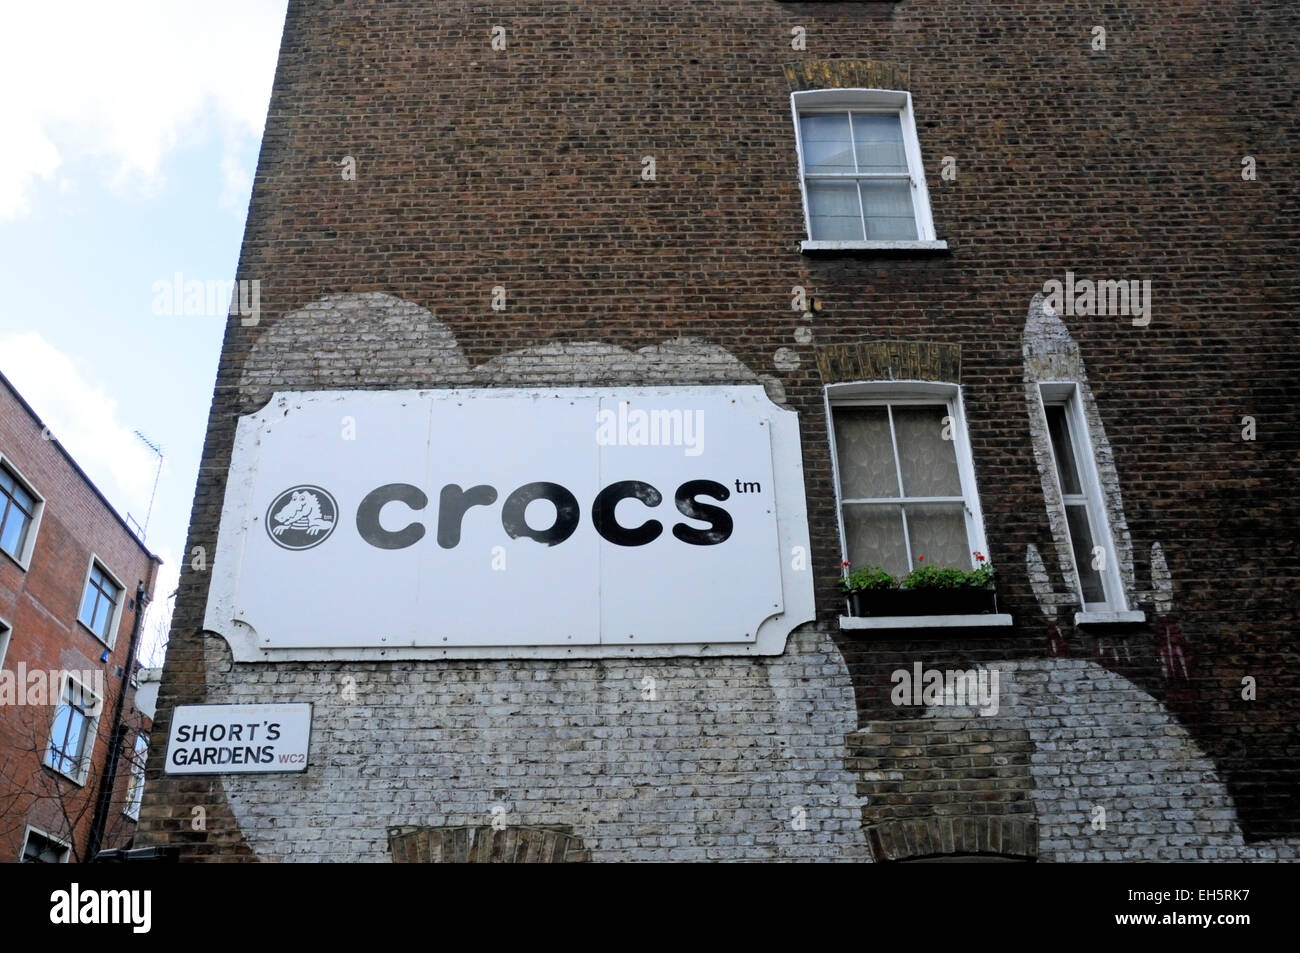 Crocs sign on wall with Short's Garden WC2 street sign below and a selection of windows, Covent Garden, London England Britain U Stock Photo